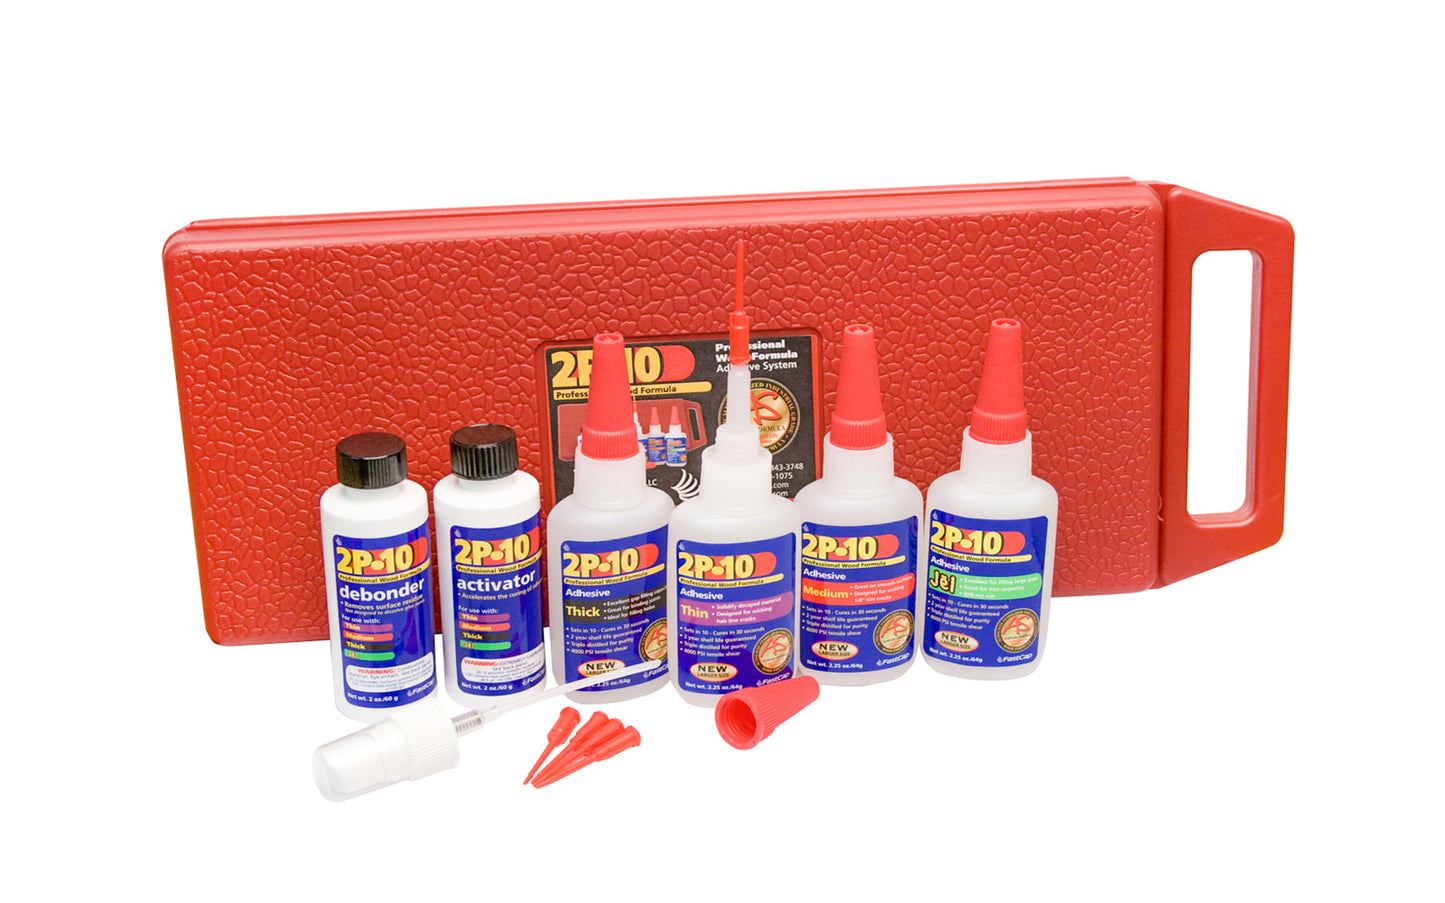 FastCap Model 2P-10 KIT. Professional wood formula Cyanoacrylate super glue kit set. 2P-10 is a two-part ten-second adhesive. Apply the adhesive, then spray activator & stick it together for a permanent bond. Very popular with woodworkers & carpenters. Thin, Medium, Thick, & Jel viscosity glues - 2.25 oz glue bottles